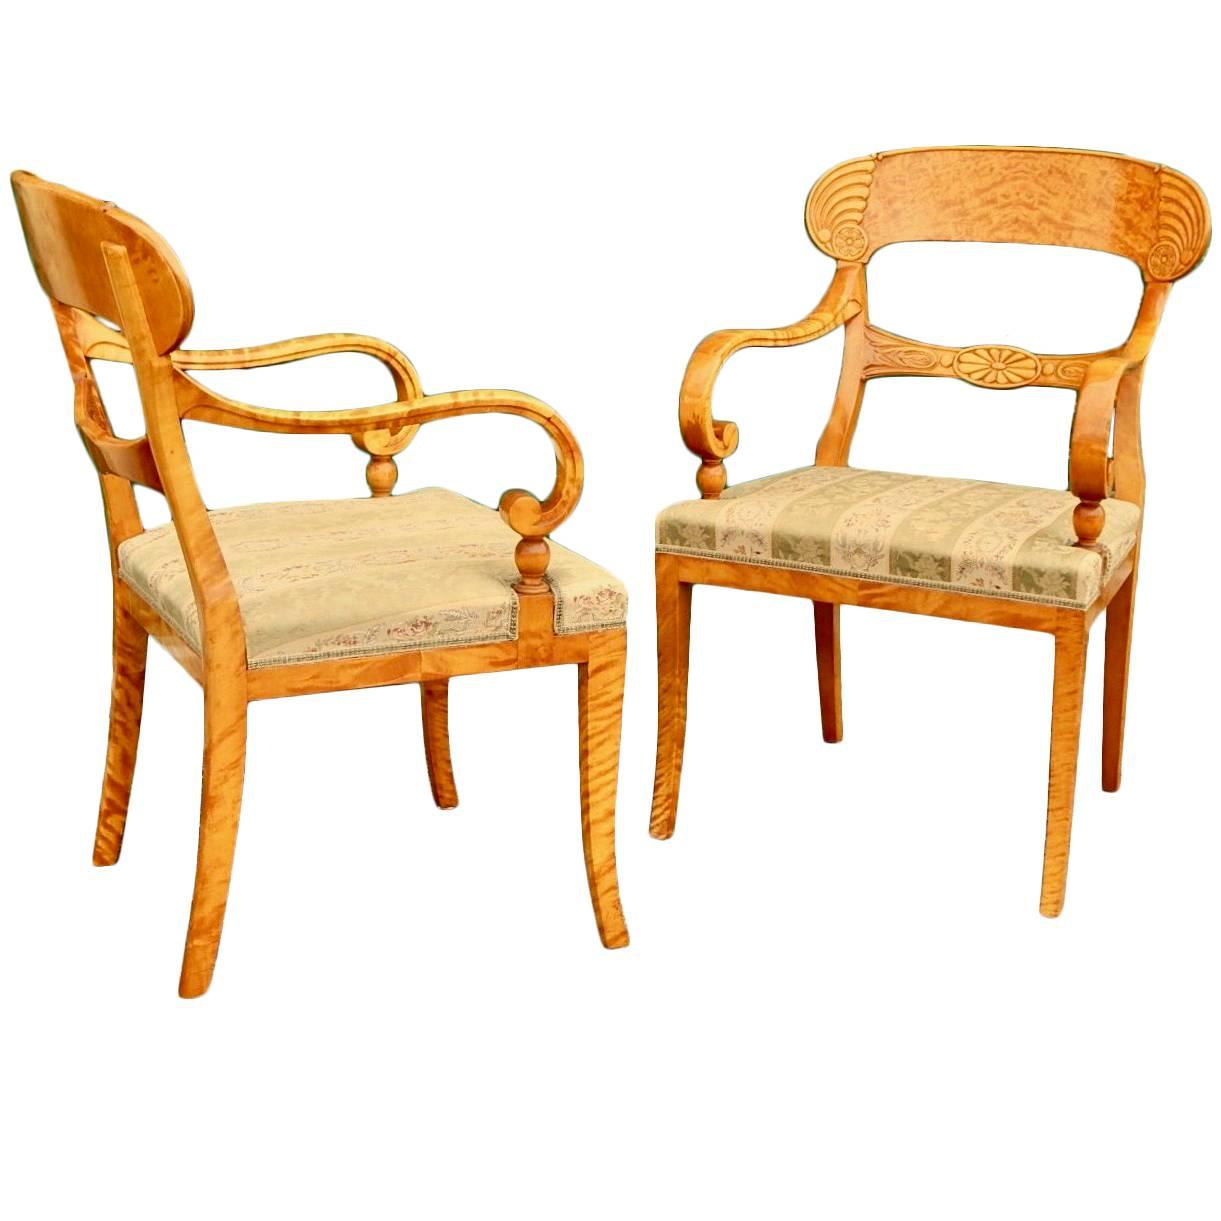 Pair of Swedish Biedermeier Revival Captains chairs in golden flame birch 1920s pair of Swedish Biedermeier Revival captain's chairs rendered in highly figured golden flame birch wood. Wood inn excellent original condition. With original very worn